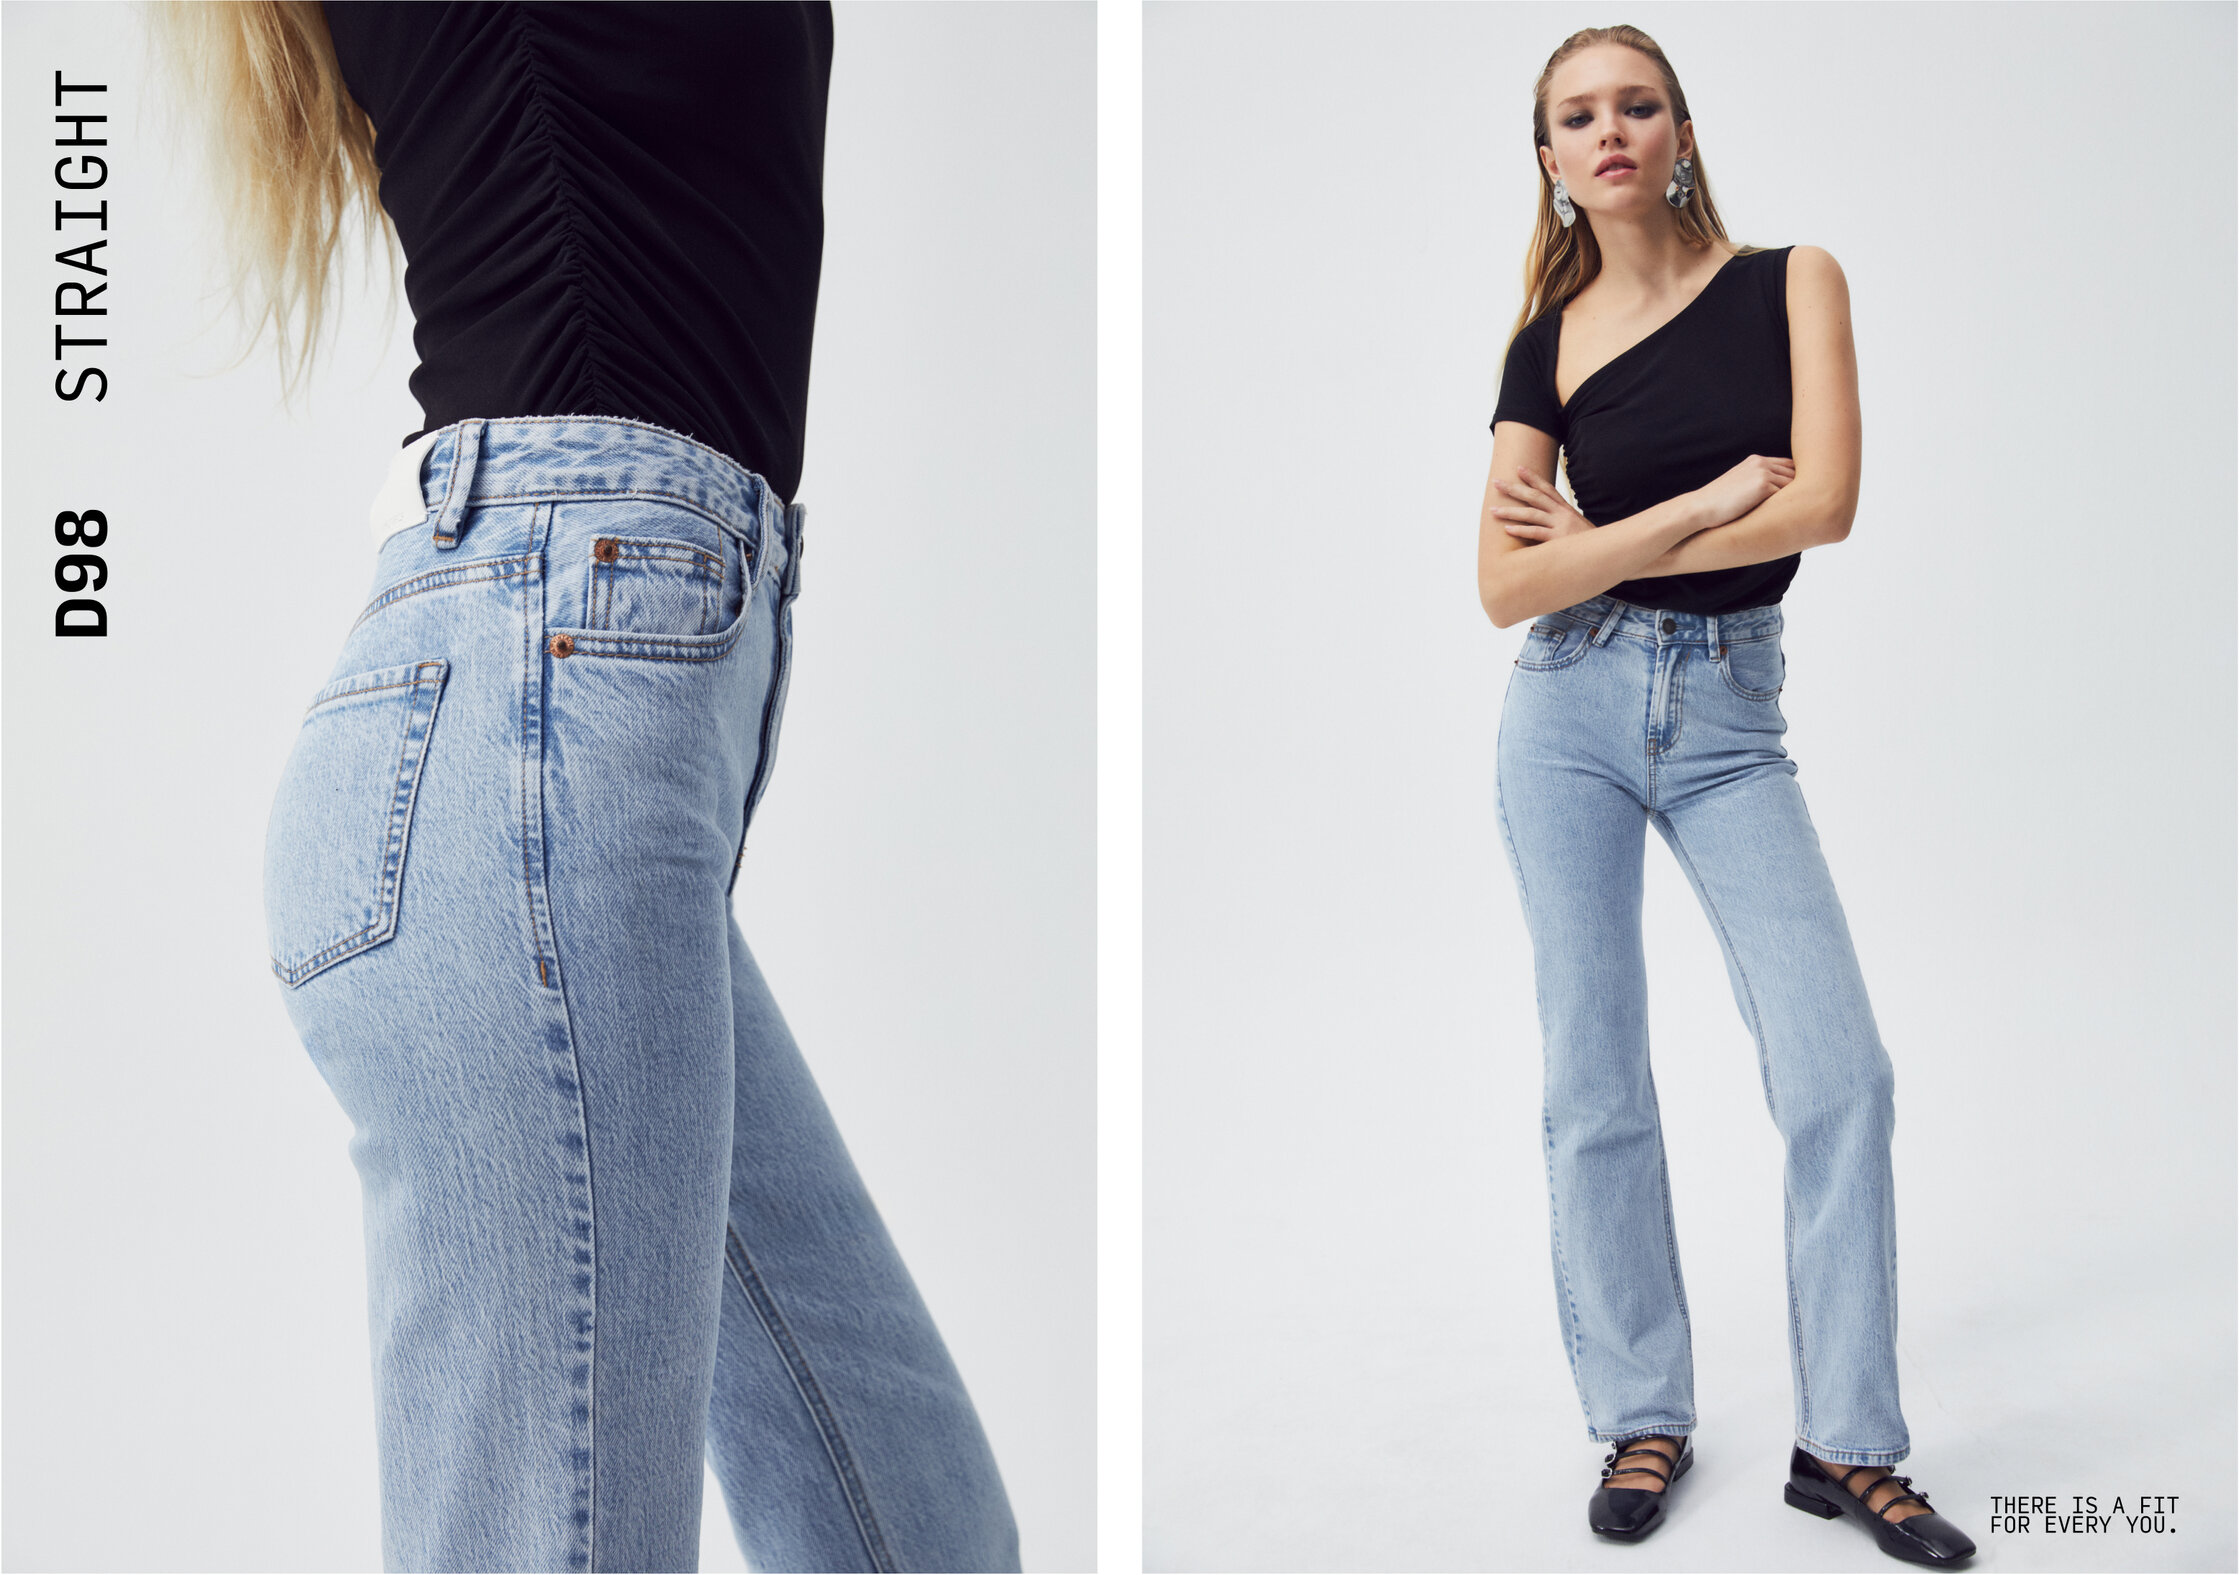 YStyle - The Stradivarius slim mom jeans. Excellent jeans and come